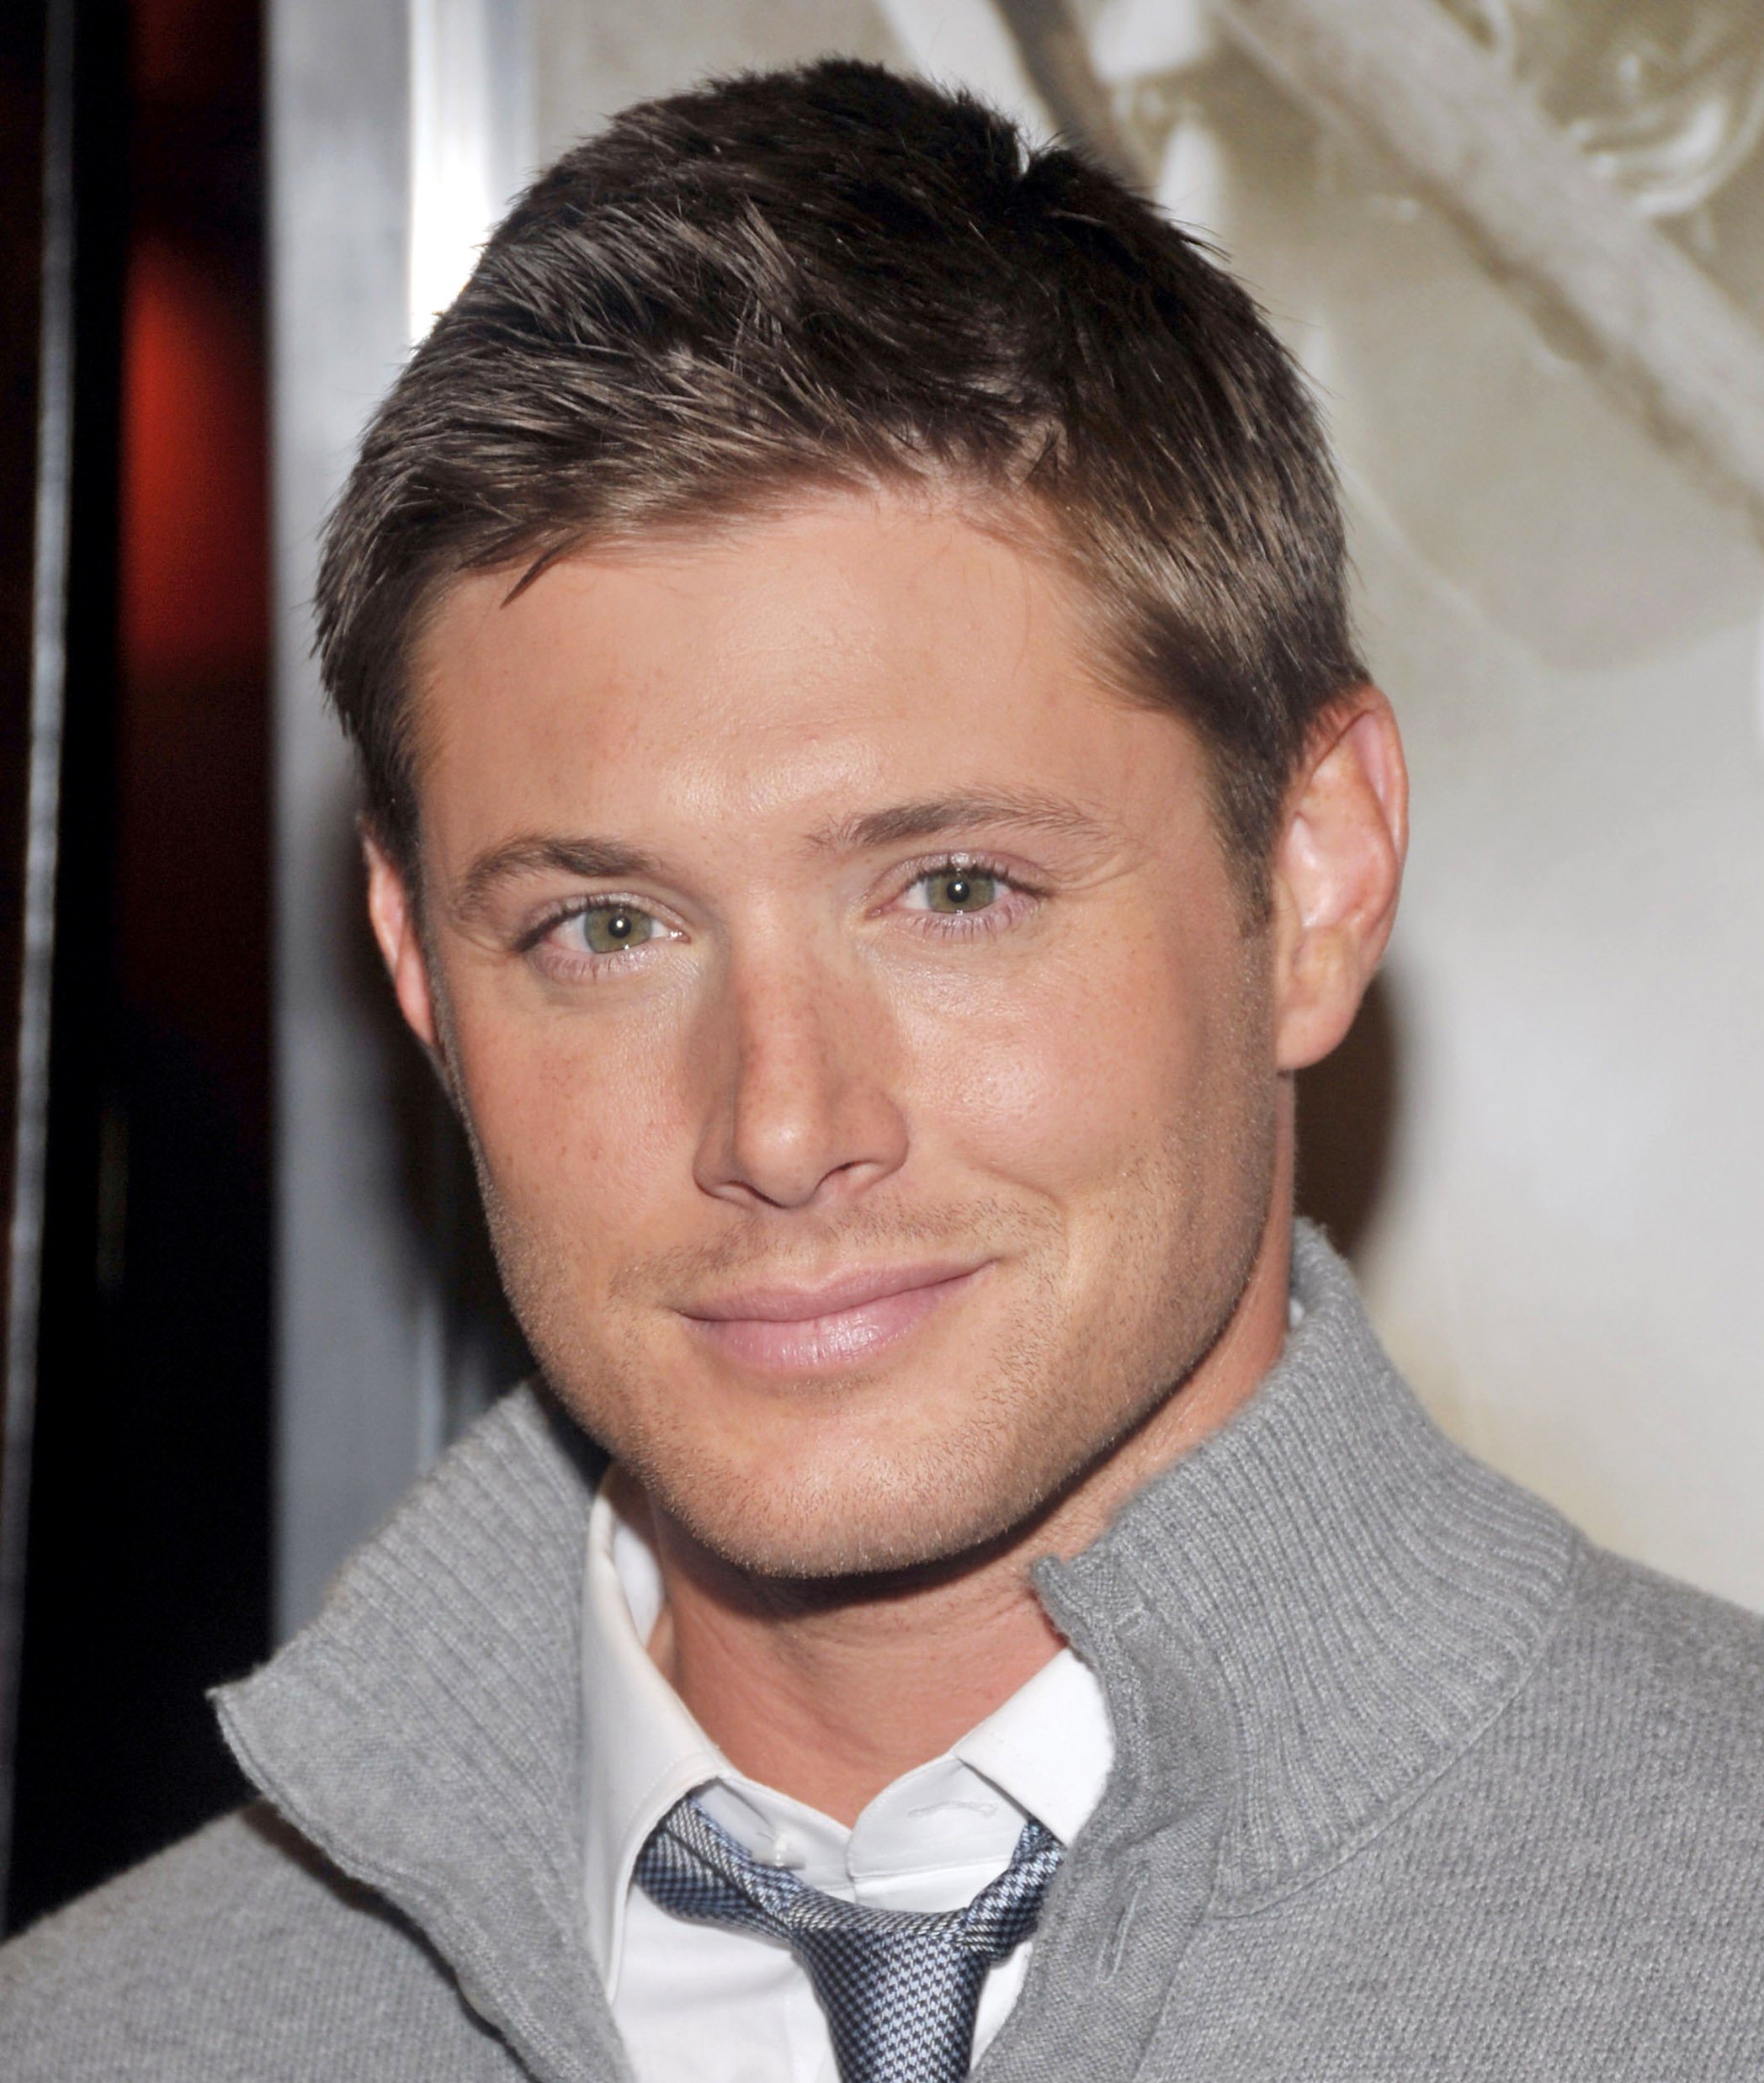 Jensen Ackles at a screening of "My Bloody Valentine 3D" in January, 2009 in Hollywood, California. | Source: Getty Images